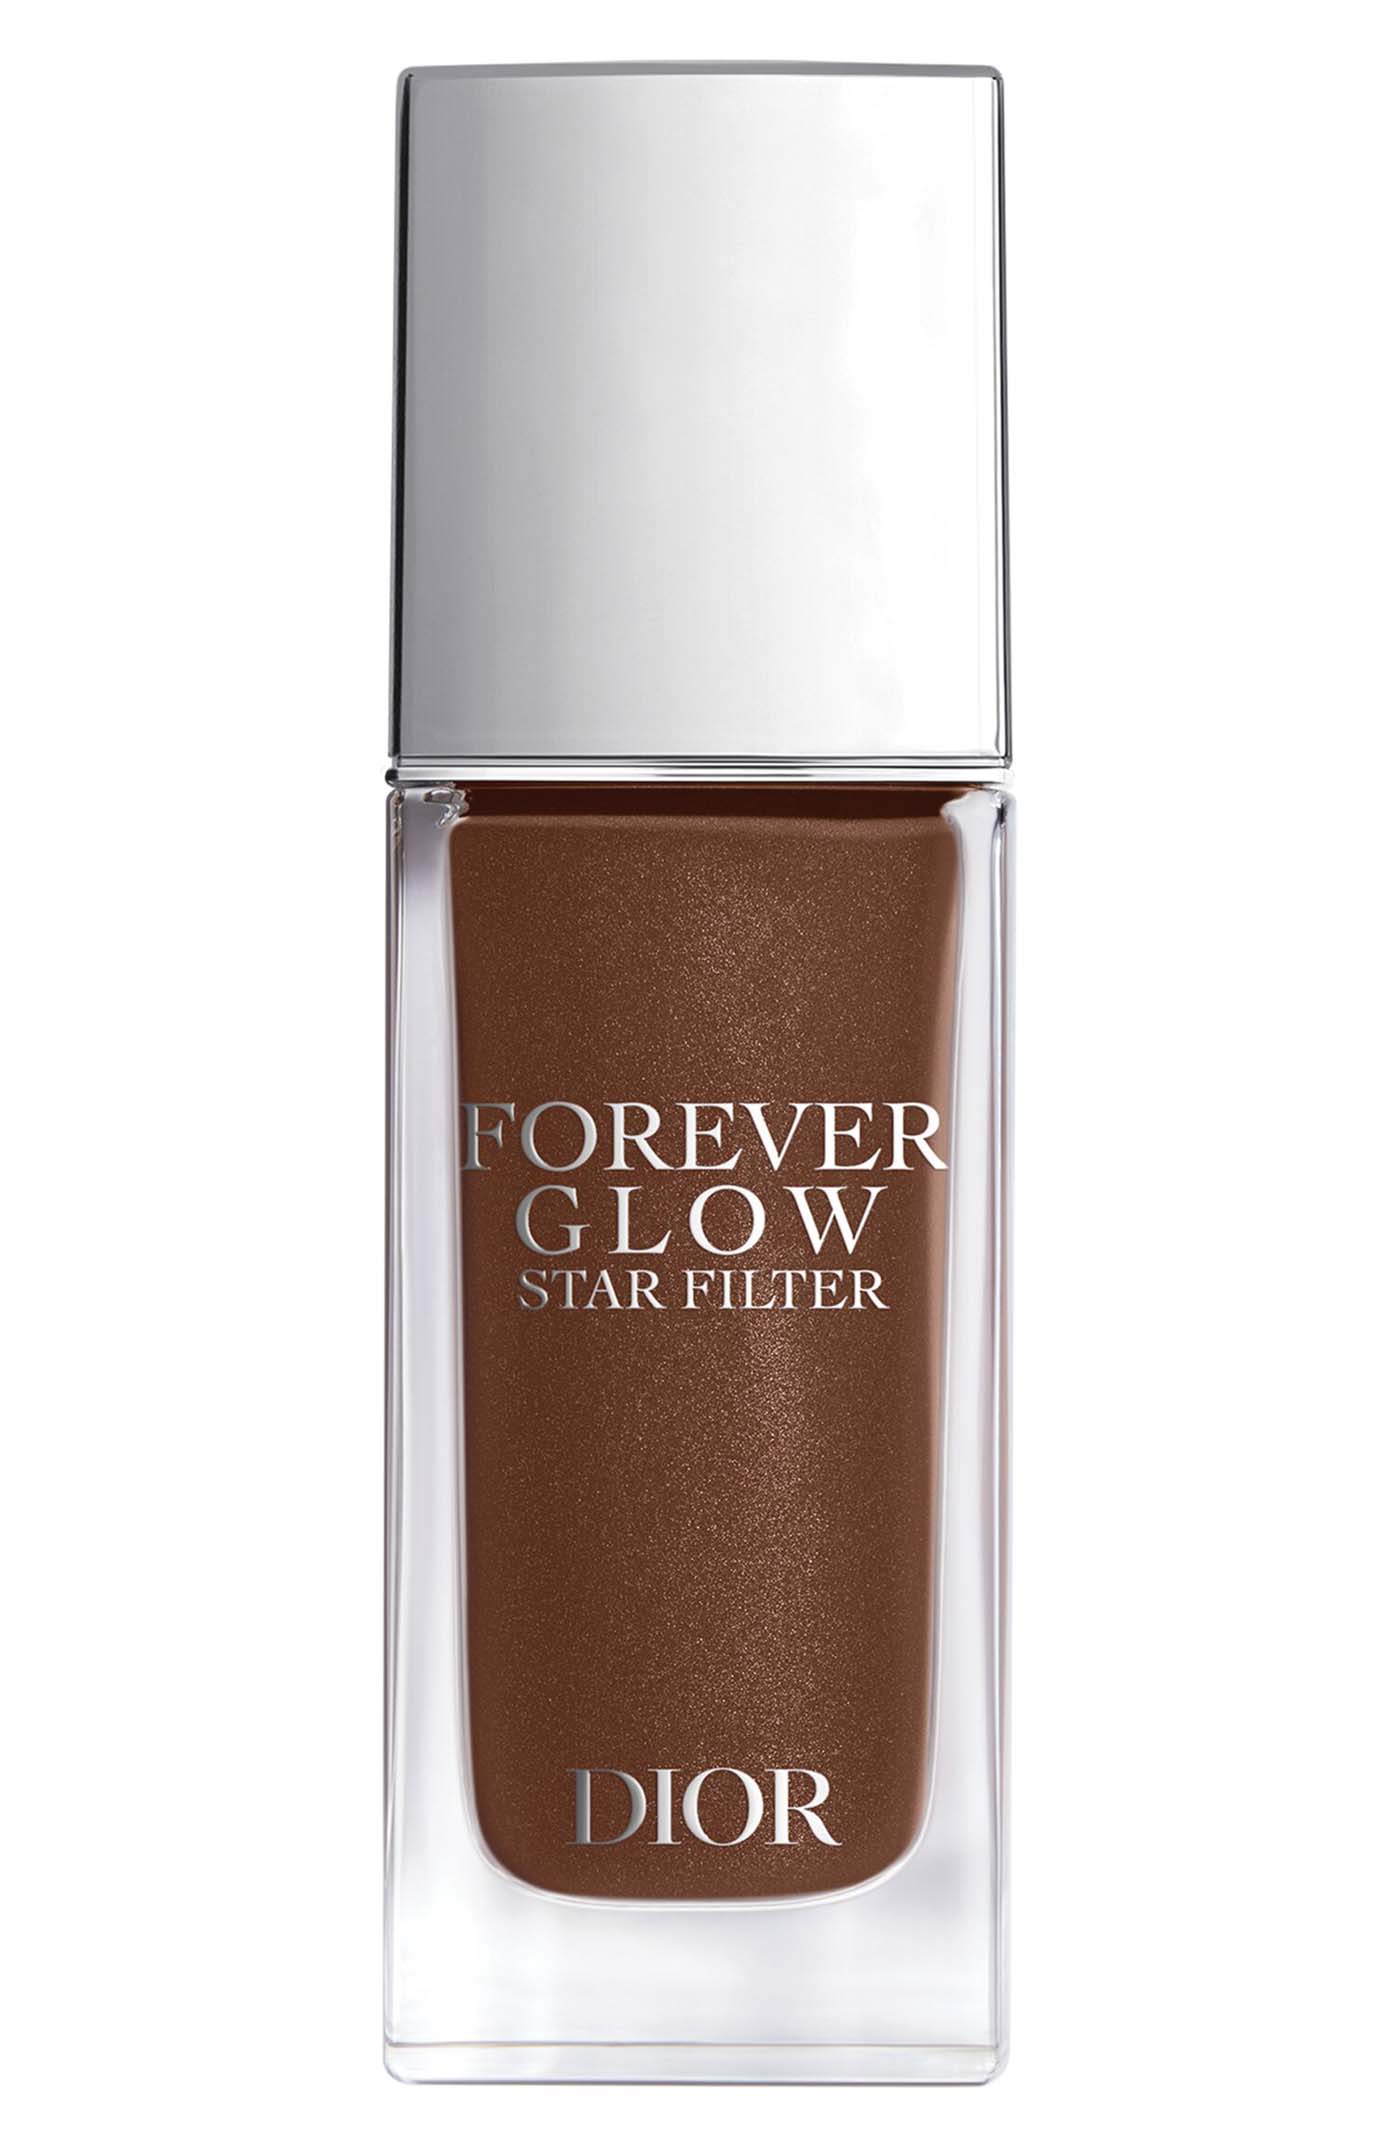 26 Dior, Forever Glow Star Filter Multi Use Complexion Enhancing Booster, Nordstrom.com